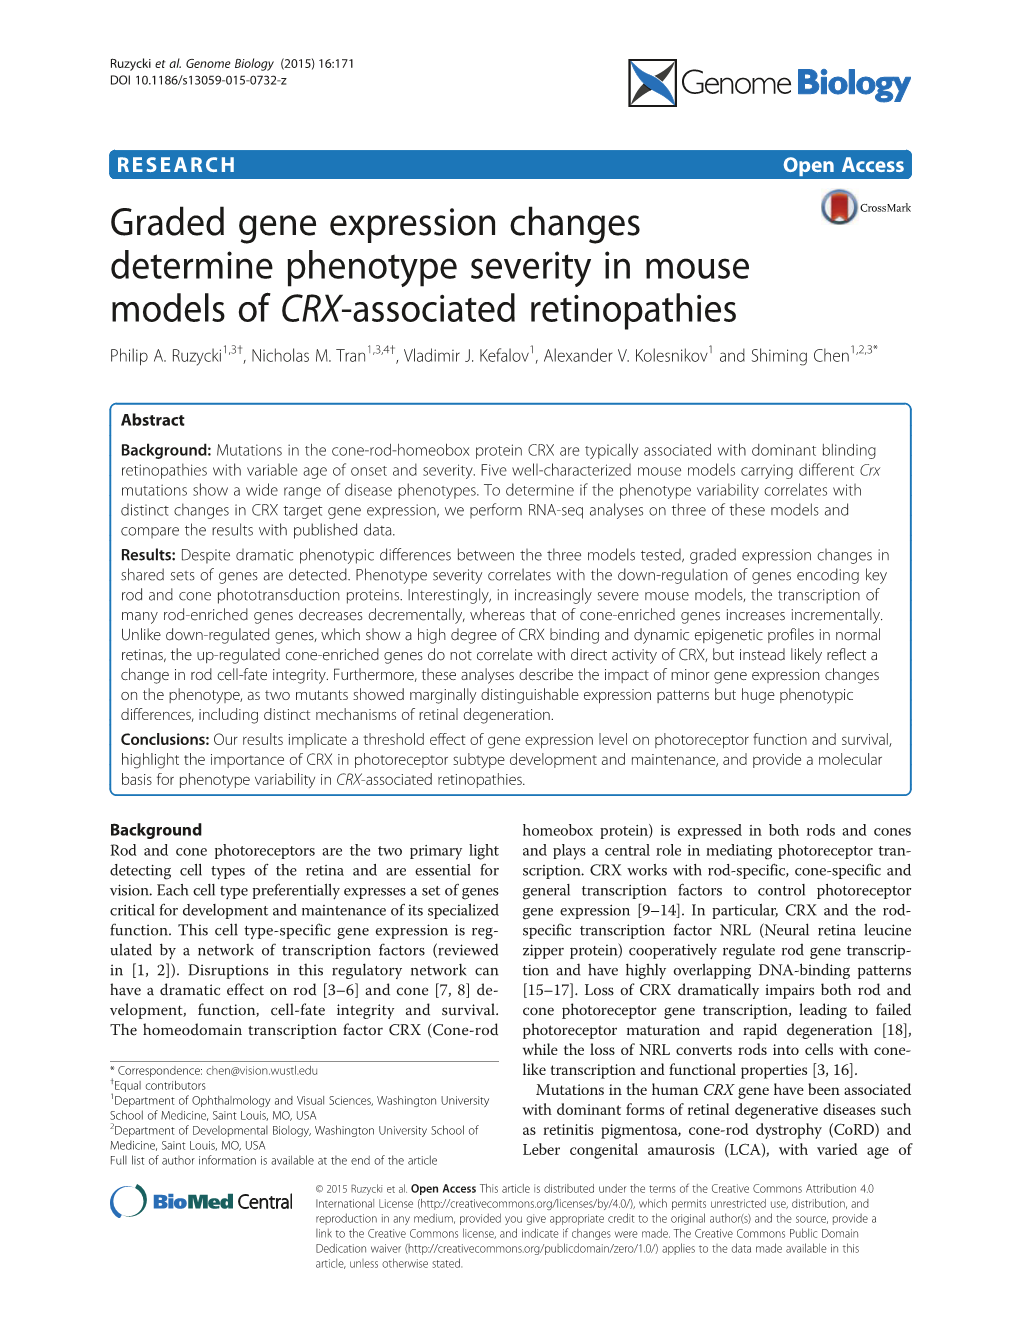 Graded Gene Expression Changes Determine Phenotype Severity in Mouse Models of CRX-Associated Retinopathies Philip A